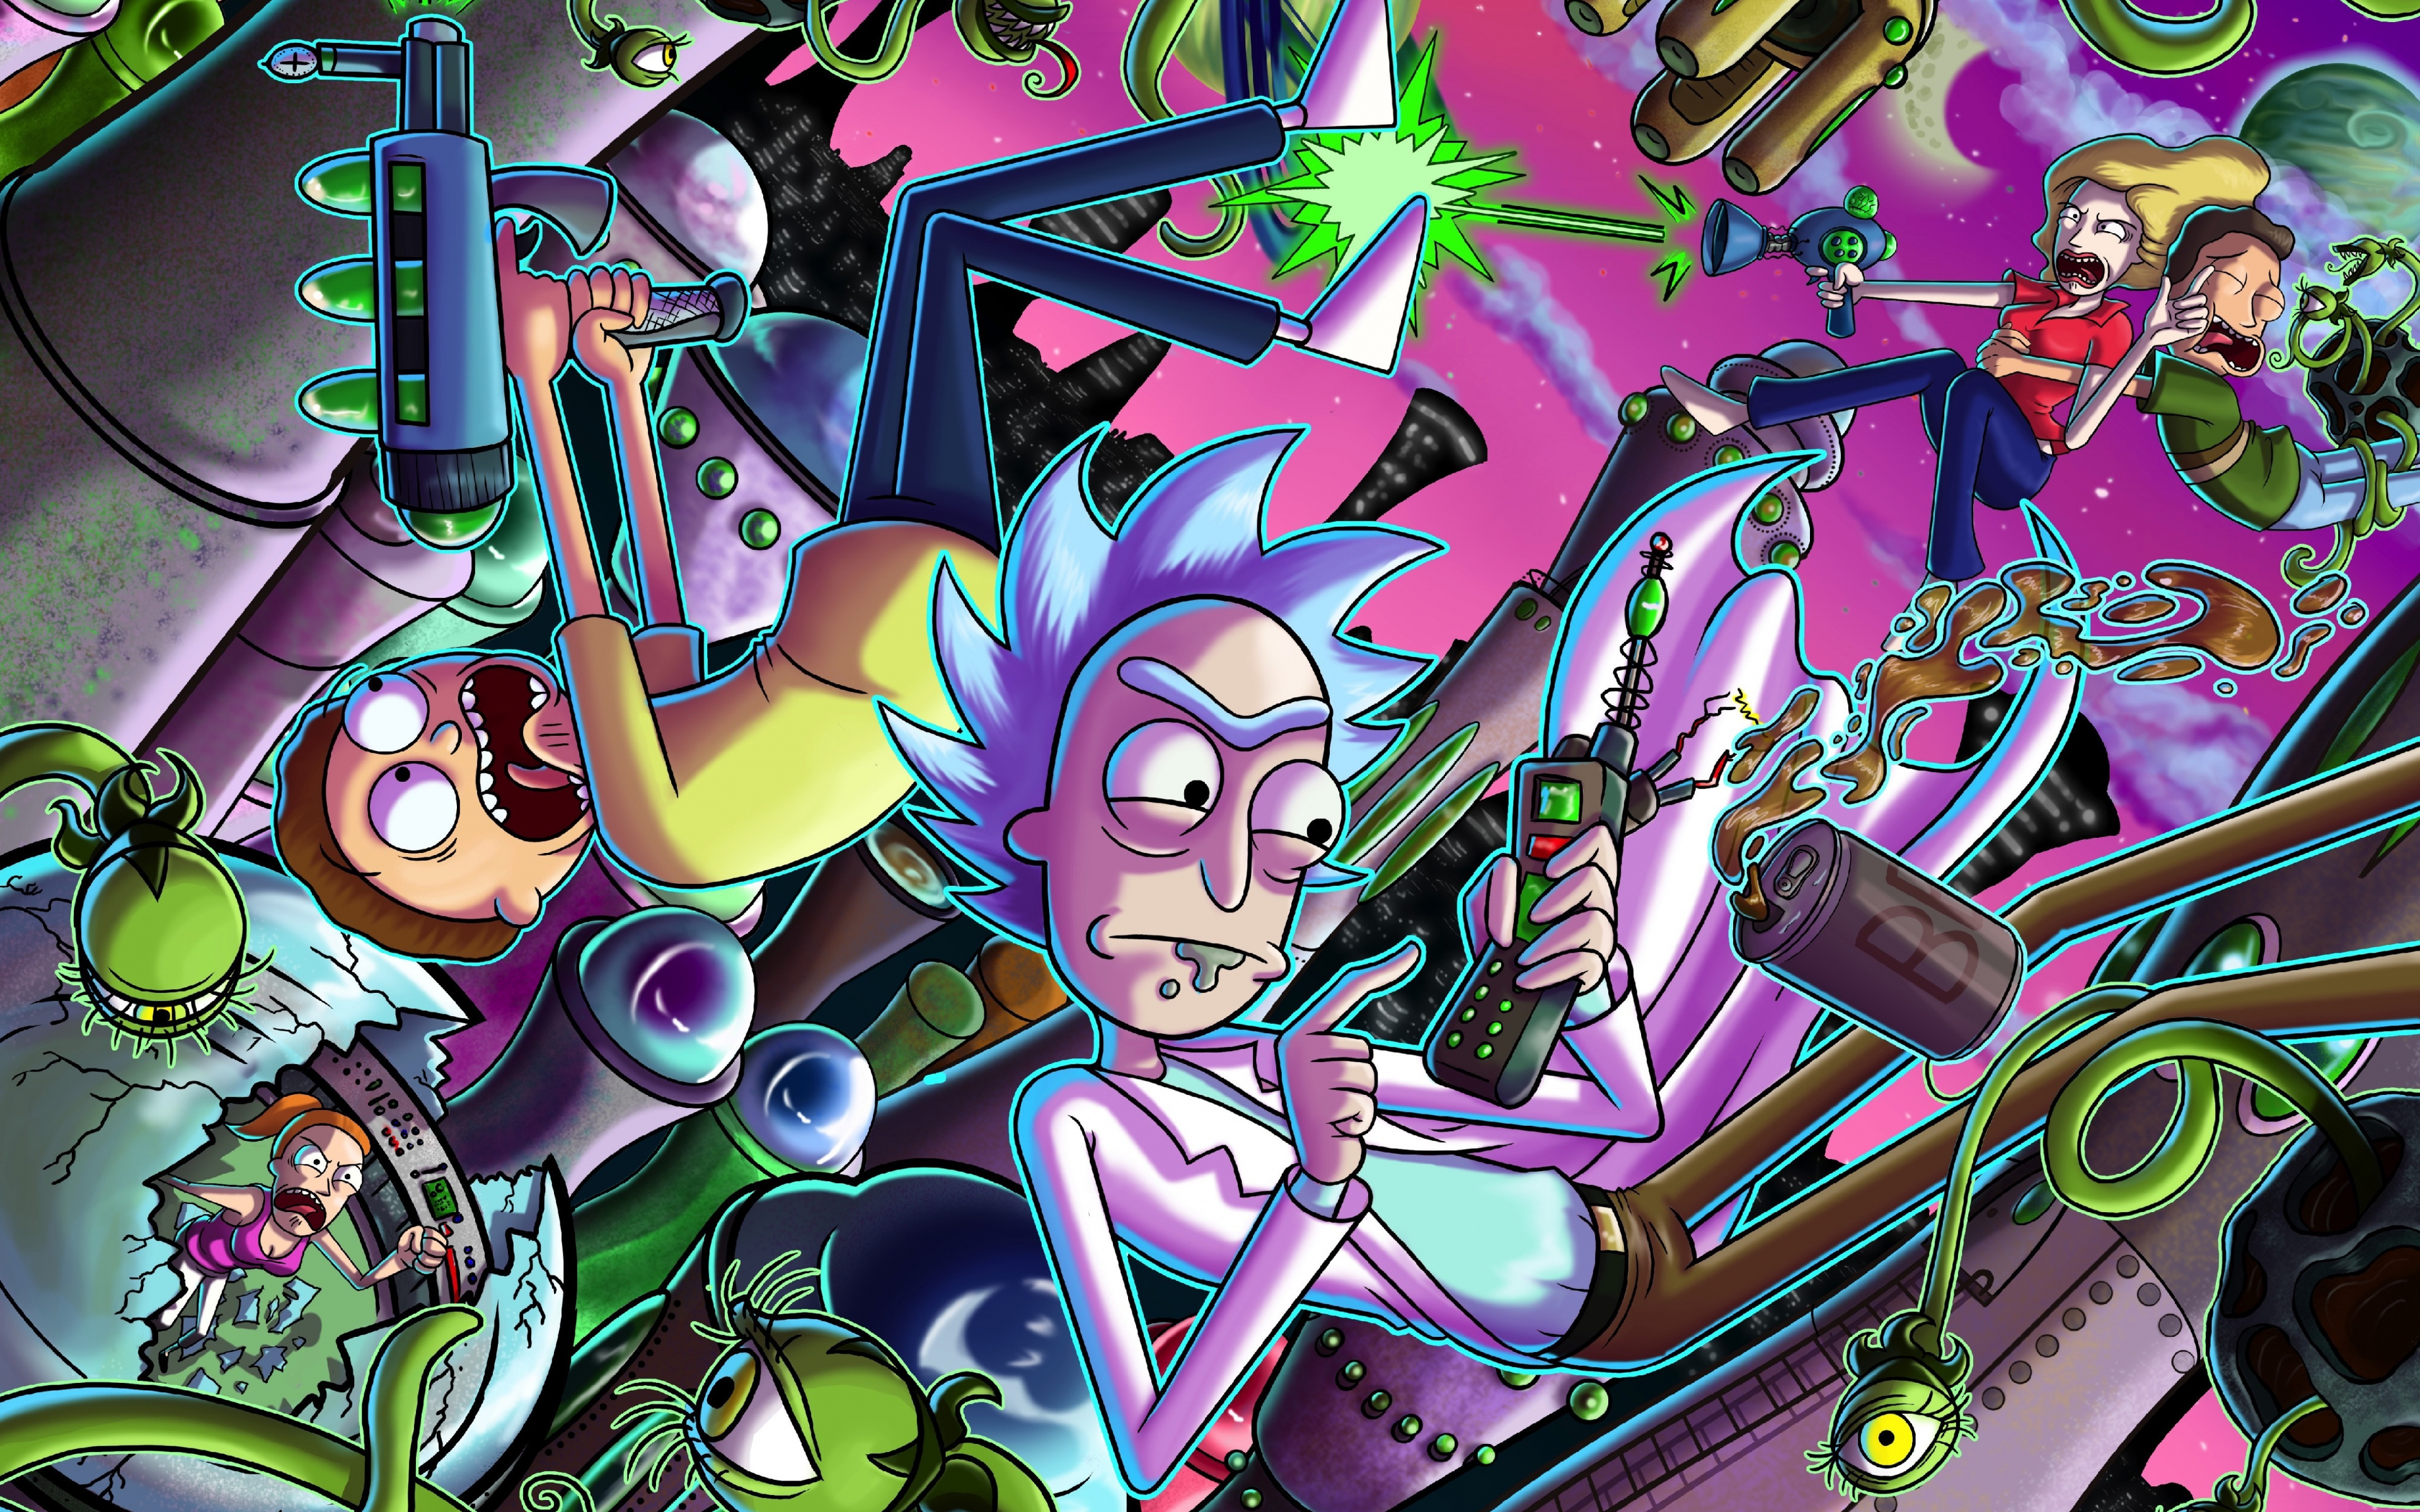 Download 3840x2400 wallpaper  rick and morty tv series 